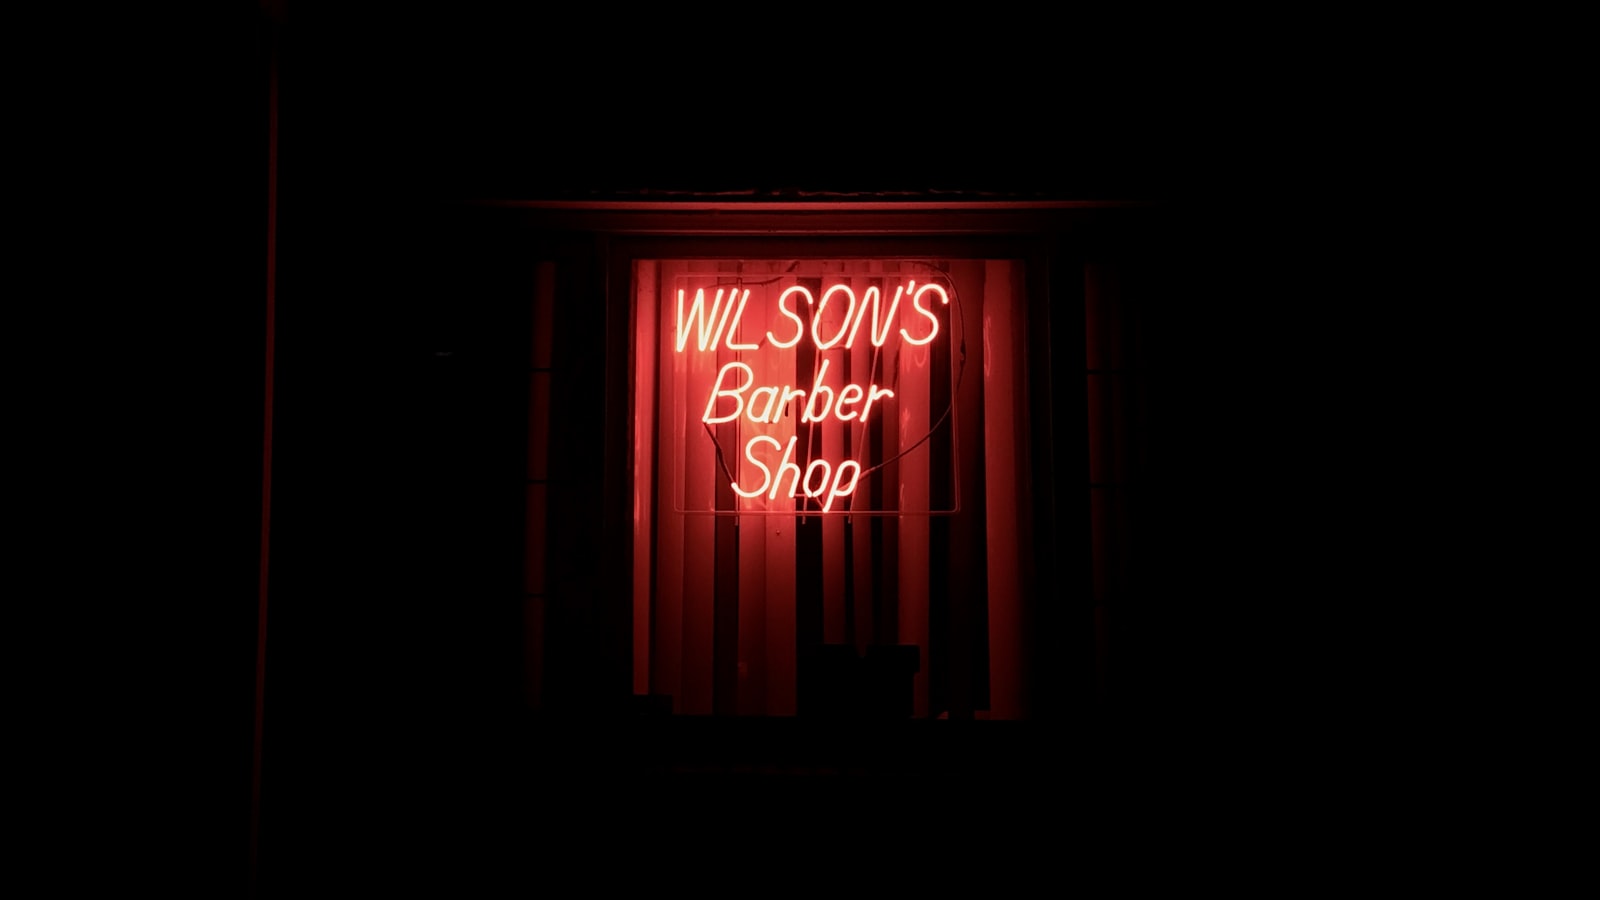 Apple iPhone 7 Plus + iPhone 7 Plus back iSight Duo camera 3.99mm f/1.8 sample photo. Wilson's barber shop lighted photography